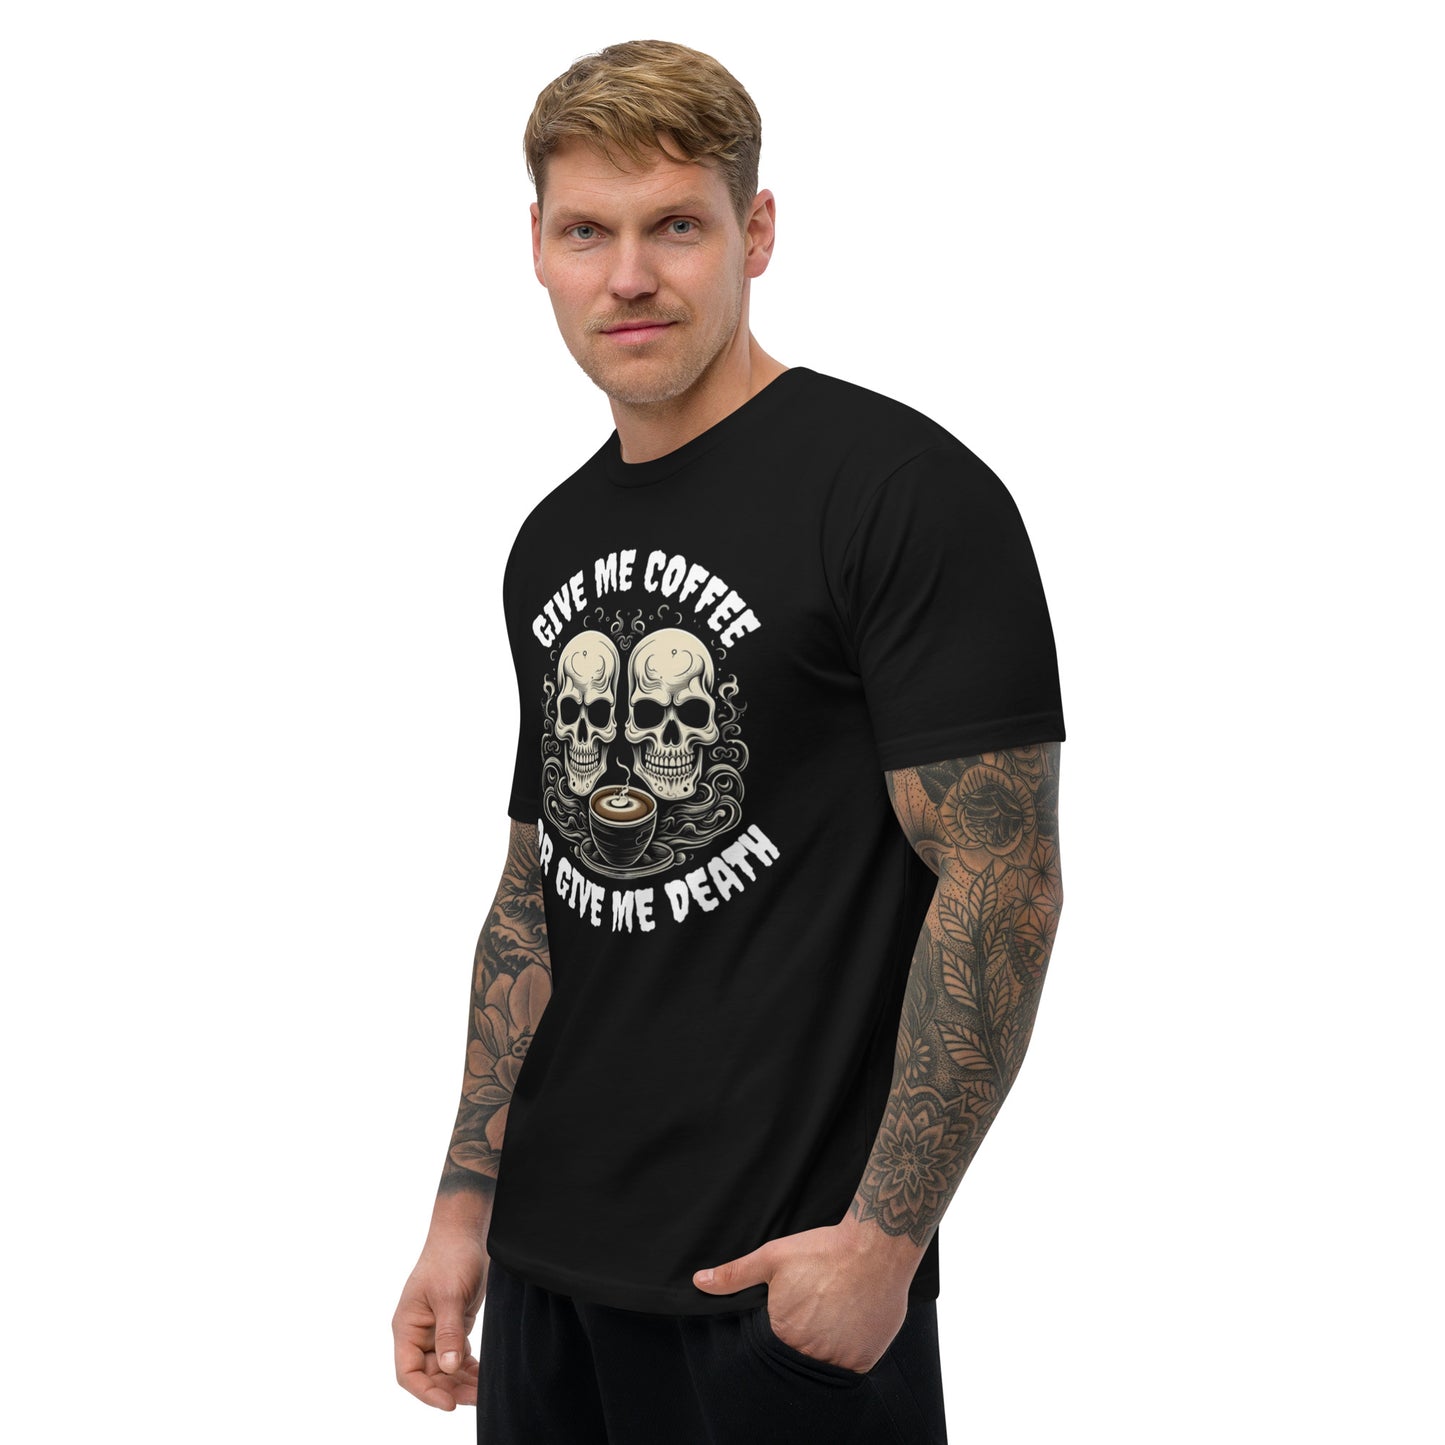 Give Me Coffee Or Give Me Death Short Sleeve T-shirt